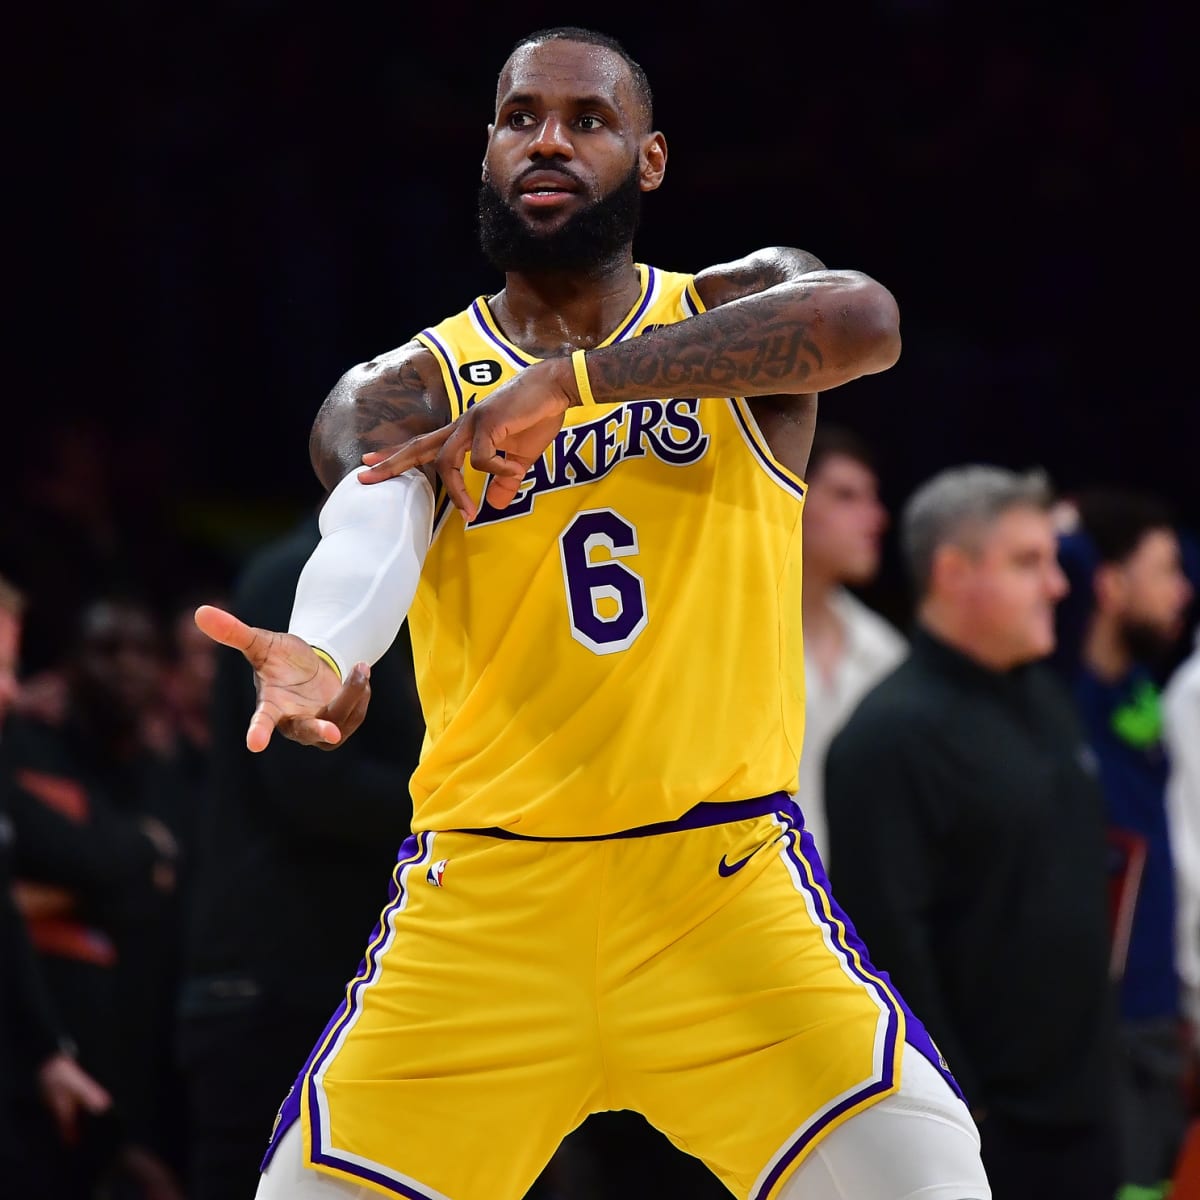 Lakers News: Watch LA Honor LeBron James' 40,000th Point During Timeout -  All Lakers | News, Rumors, Videos, Schedule, Roster, Salaries And More